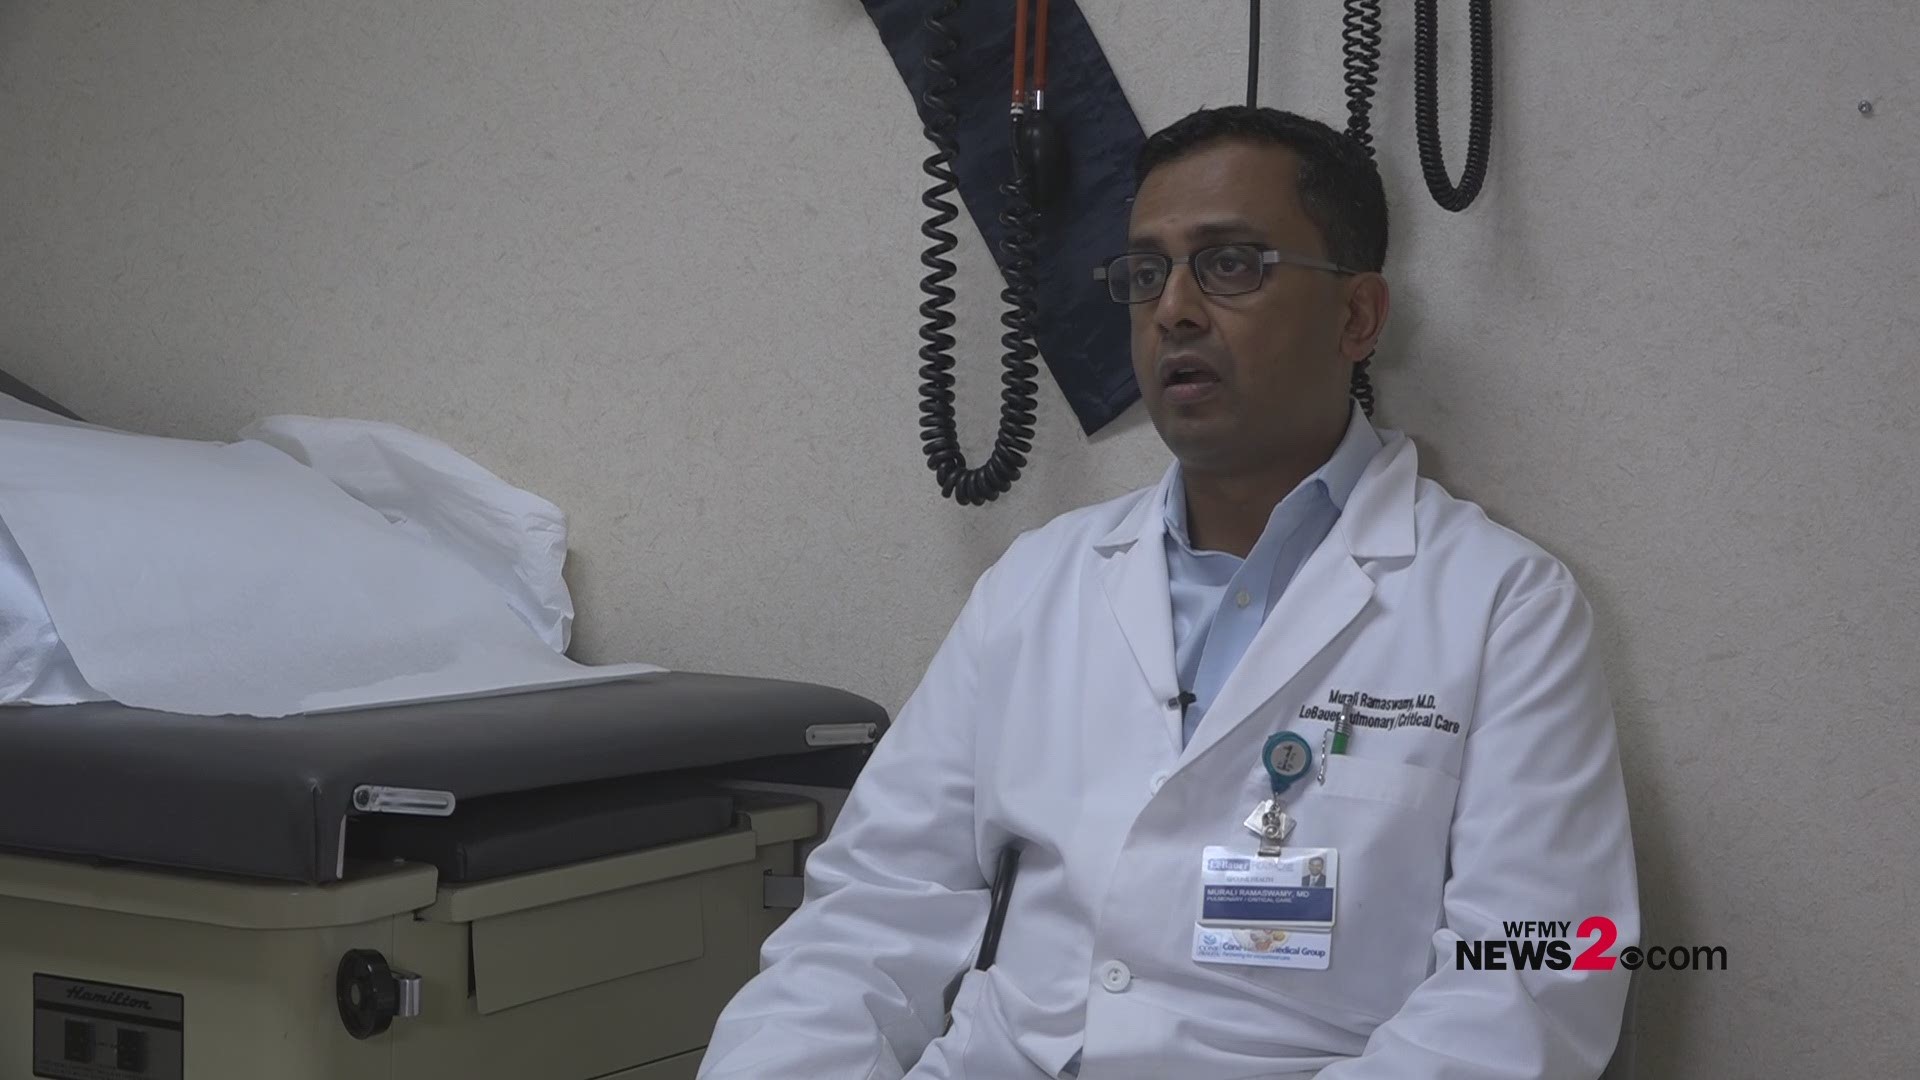 Dr. Murali Ramaswamy, Director of the Interstitial Lung Disease Program for LeBauer Health Care at Cone Health speaks on the effects of vaping.